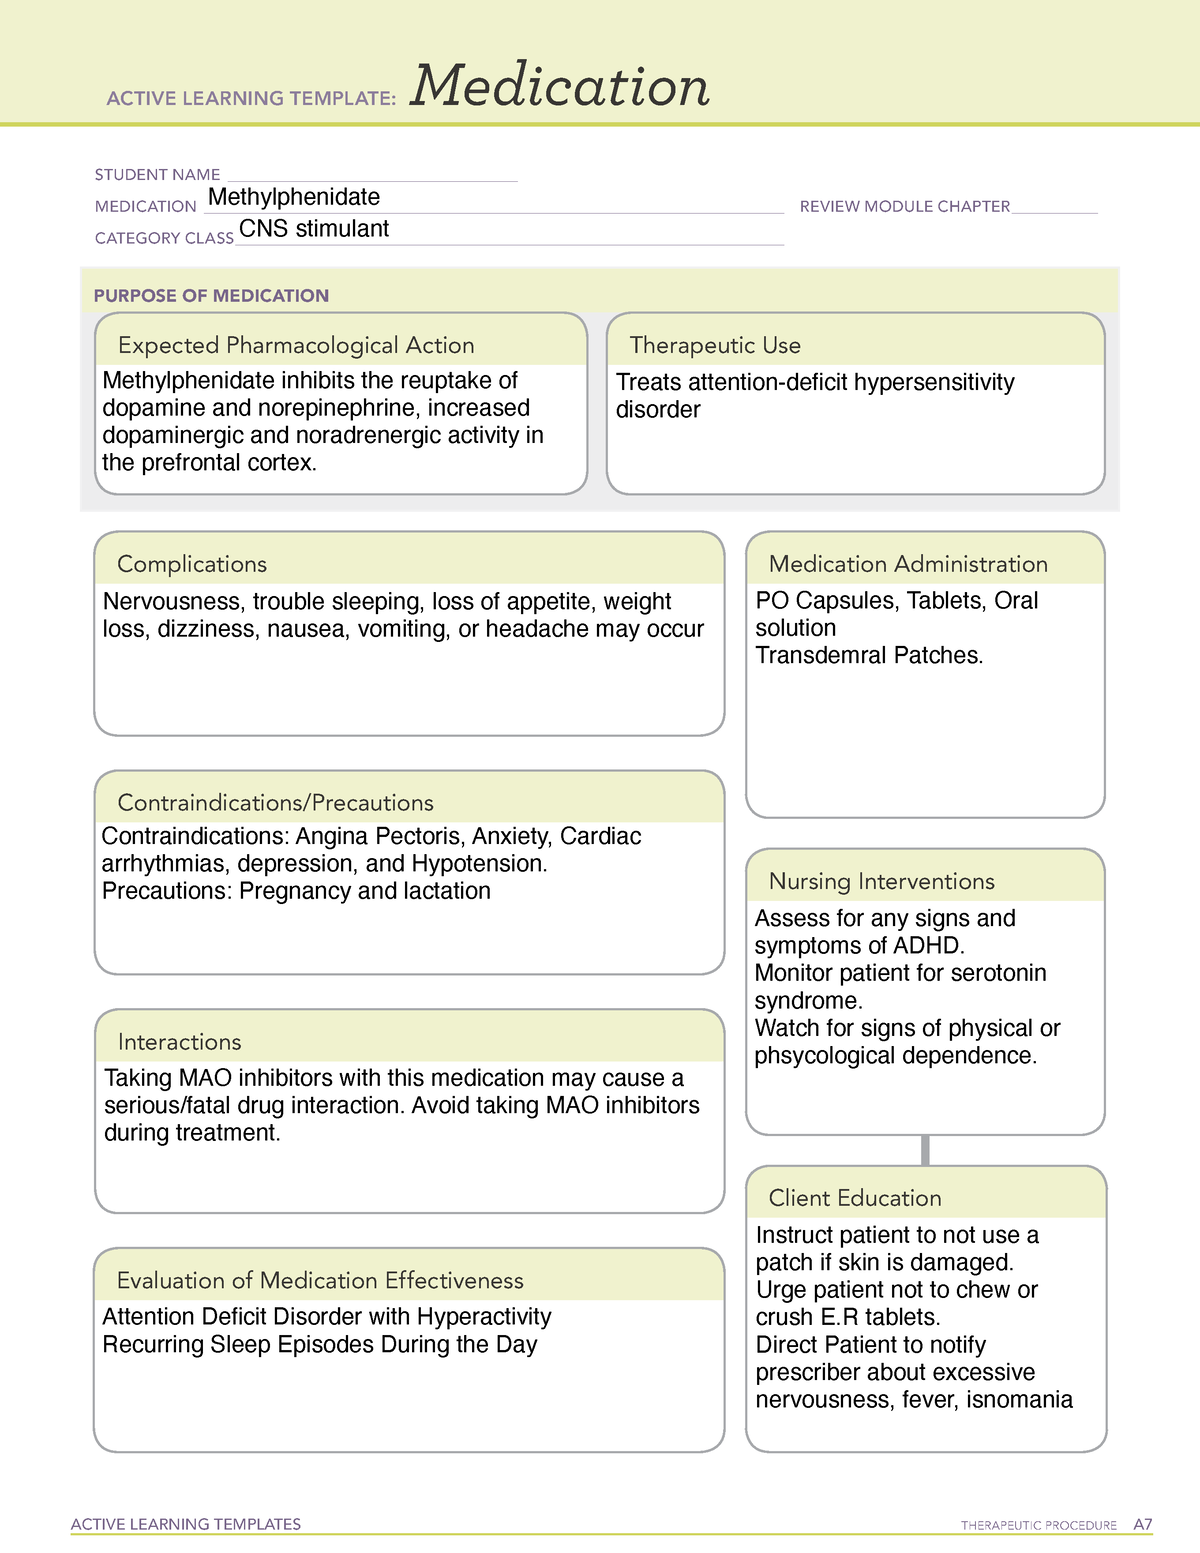 methylphenidate-learning-template-active-learning-templates-therapeutic-procedure-a